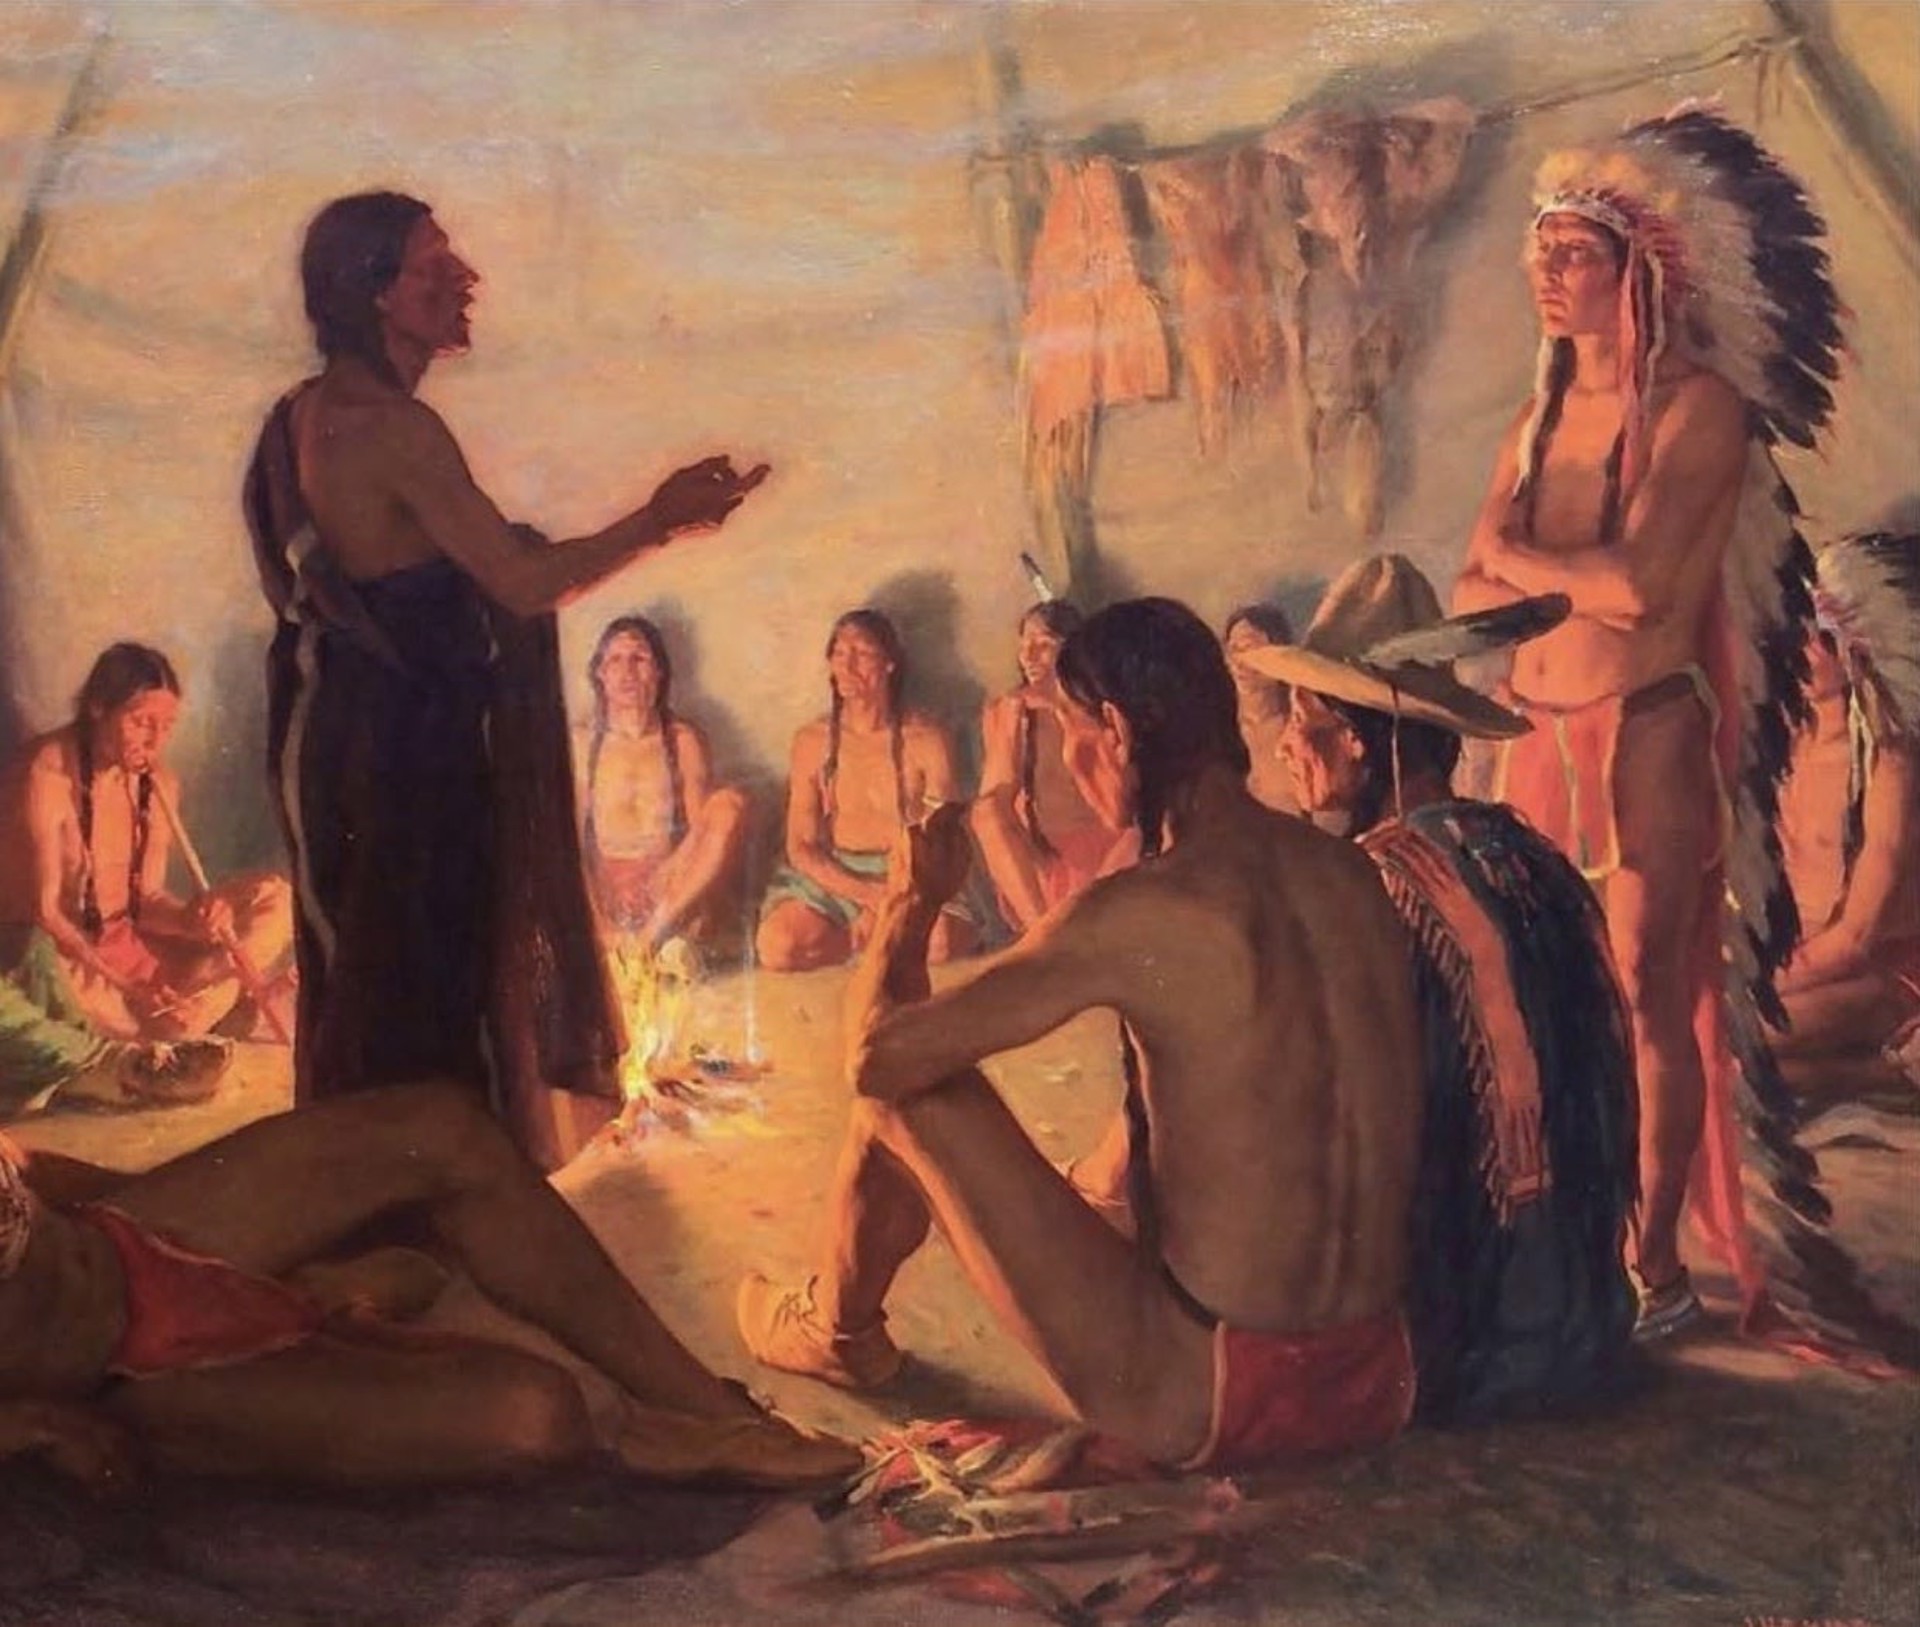 COUNSEL OF THE CHIEFS by Joseph Henry Sharp [1859-1953]